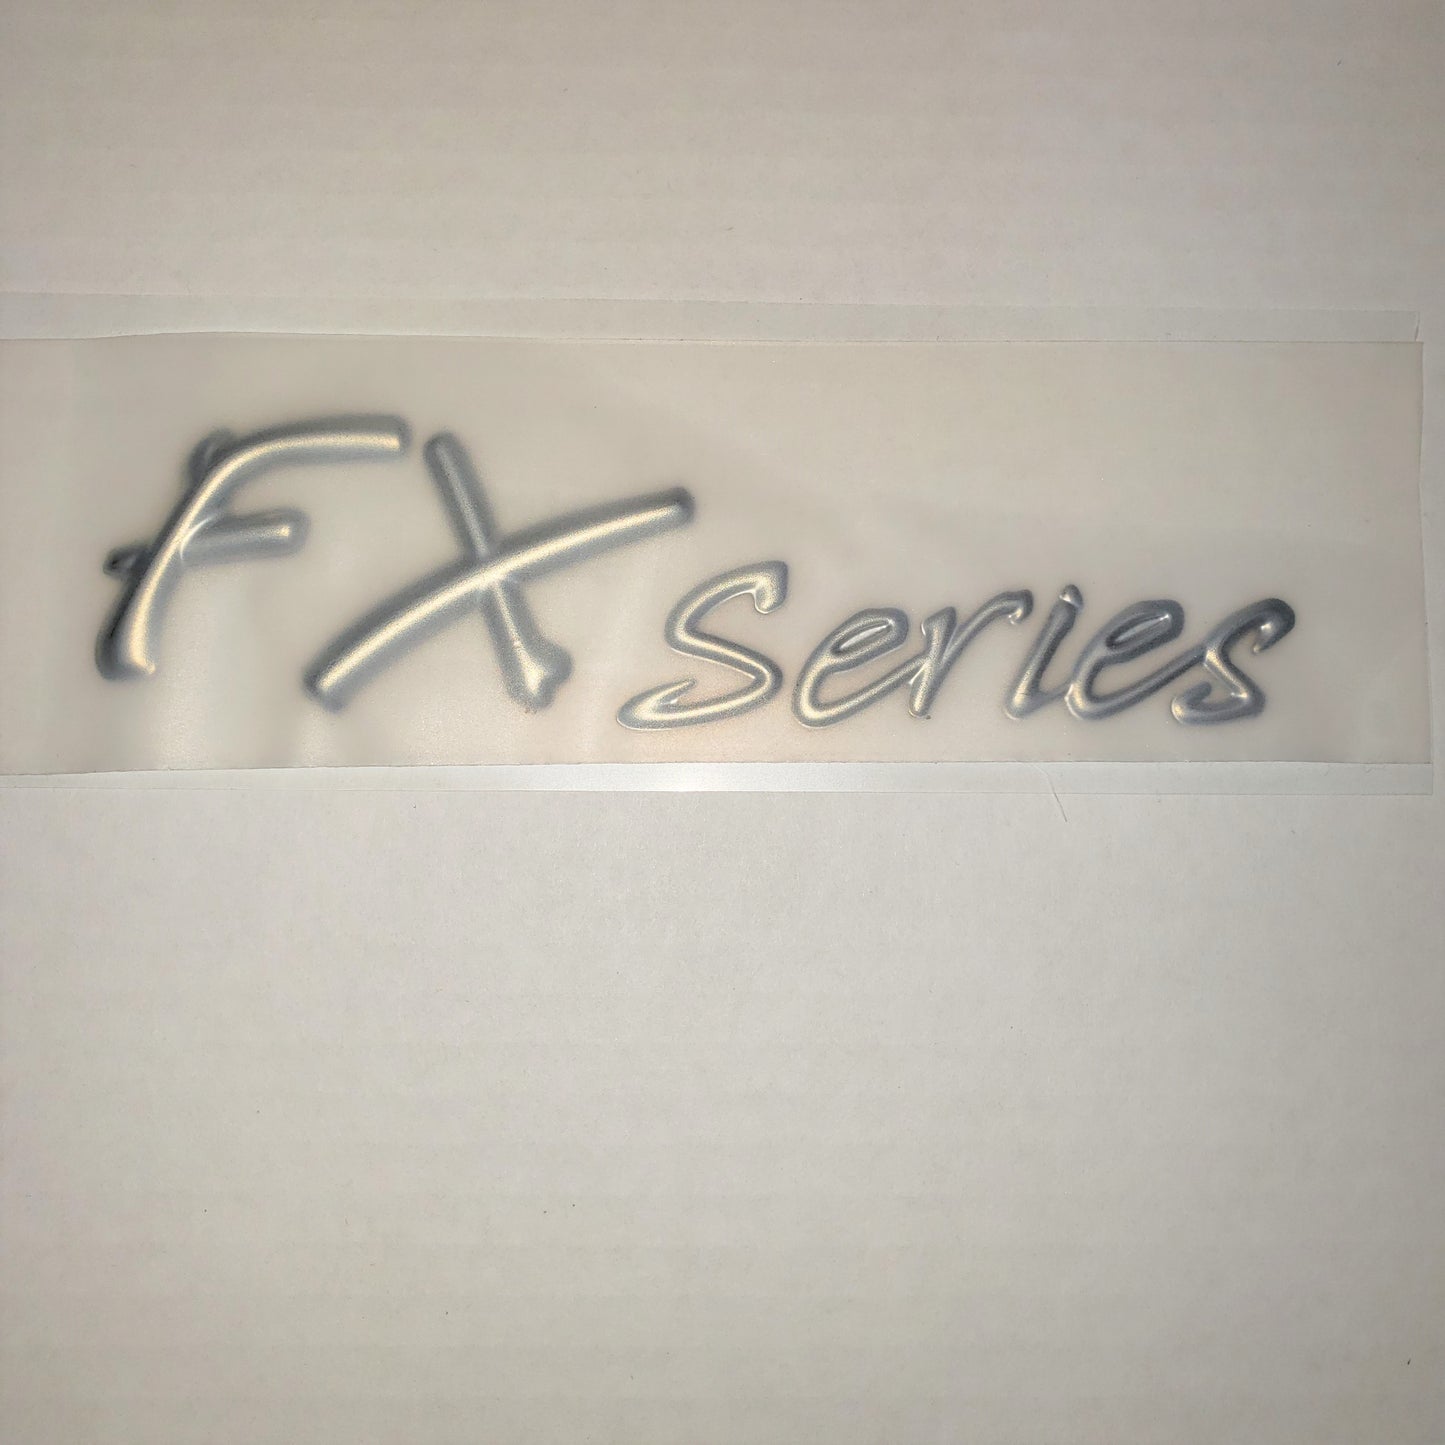 New Authentic Skeeter Emblem FX Series Silver 6.42" X 1.64"